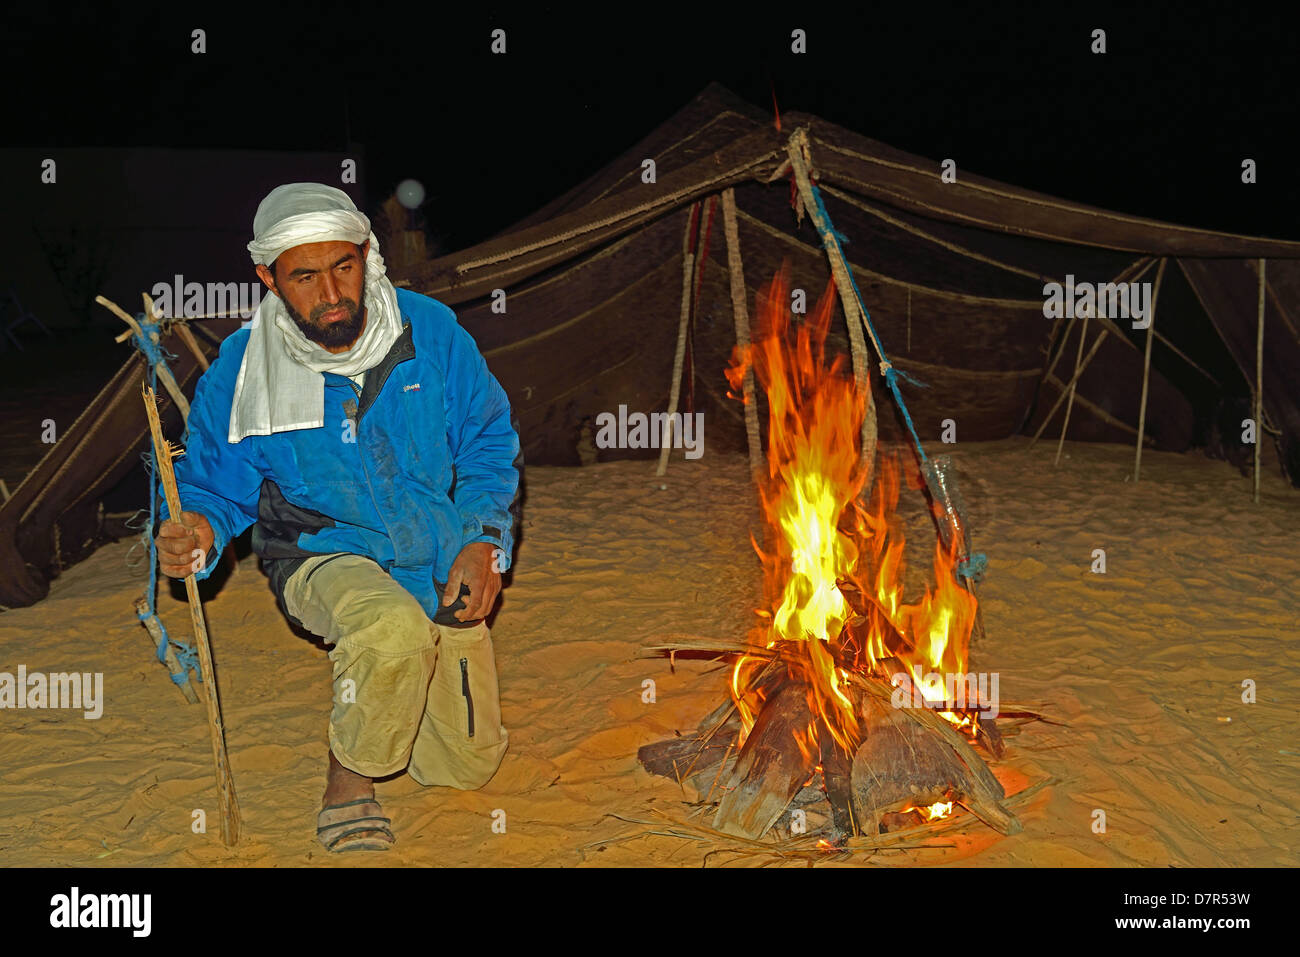 https://c8.alamy.com/comp/D7R53W/bedouin-making-a-fire-in-the-dunes-at-douz-south-of-tunisia-D7R53W.jpg